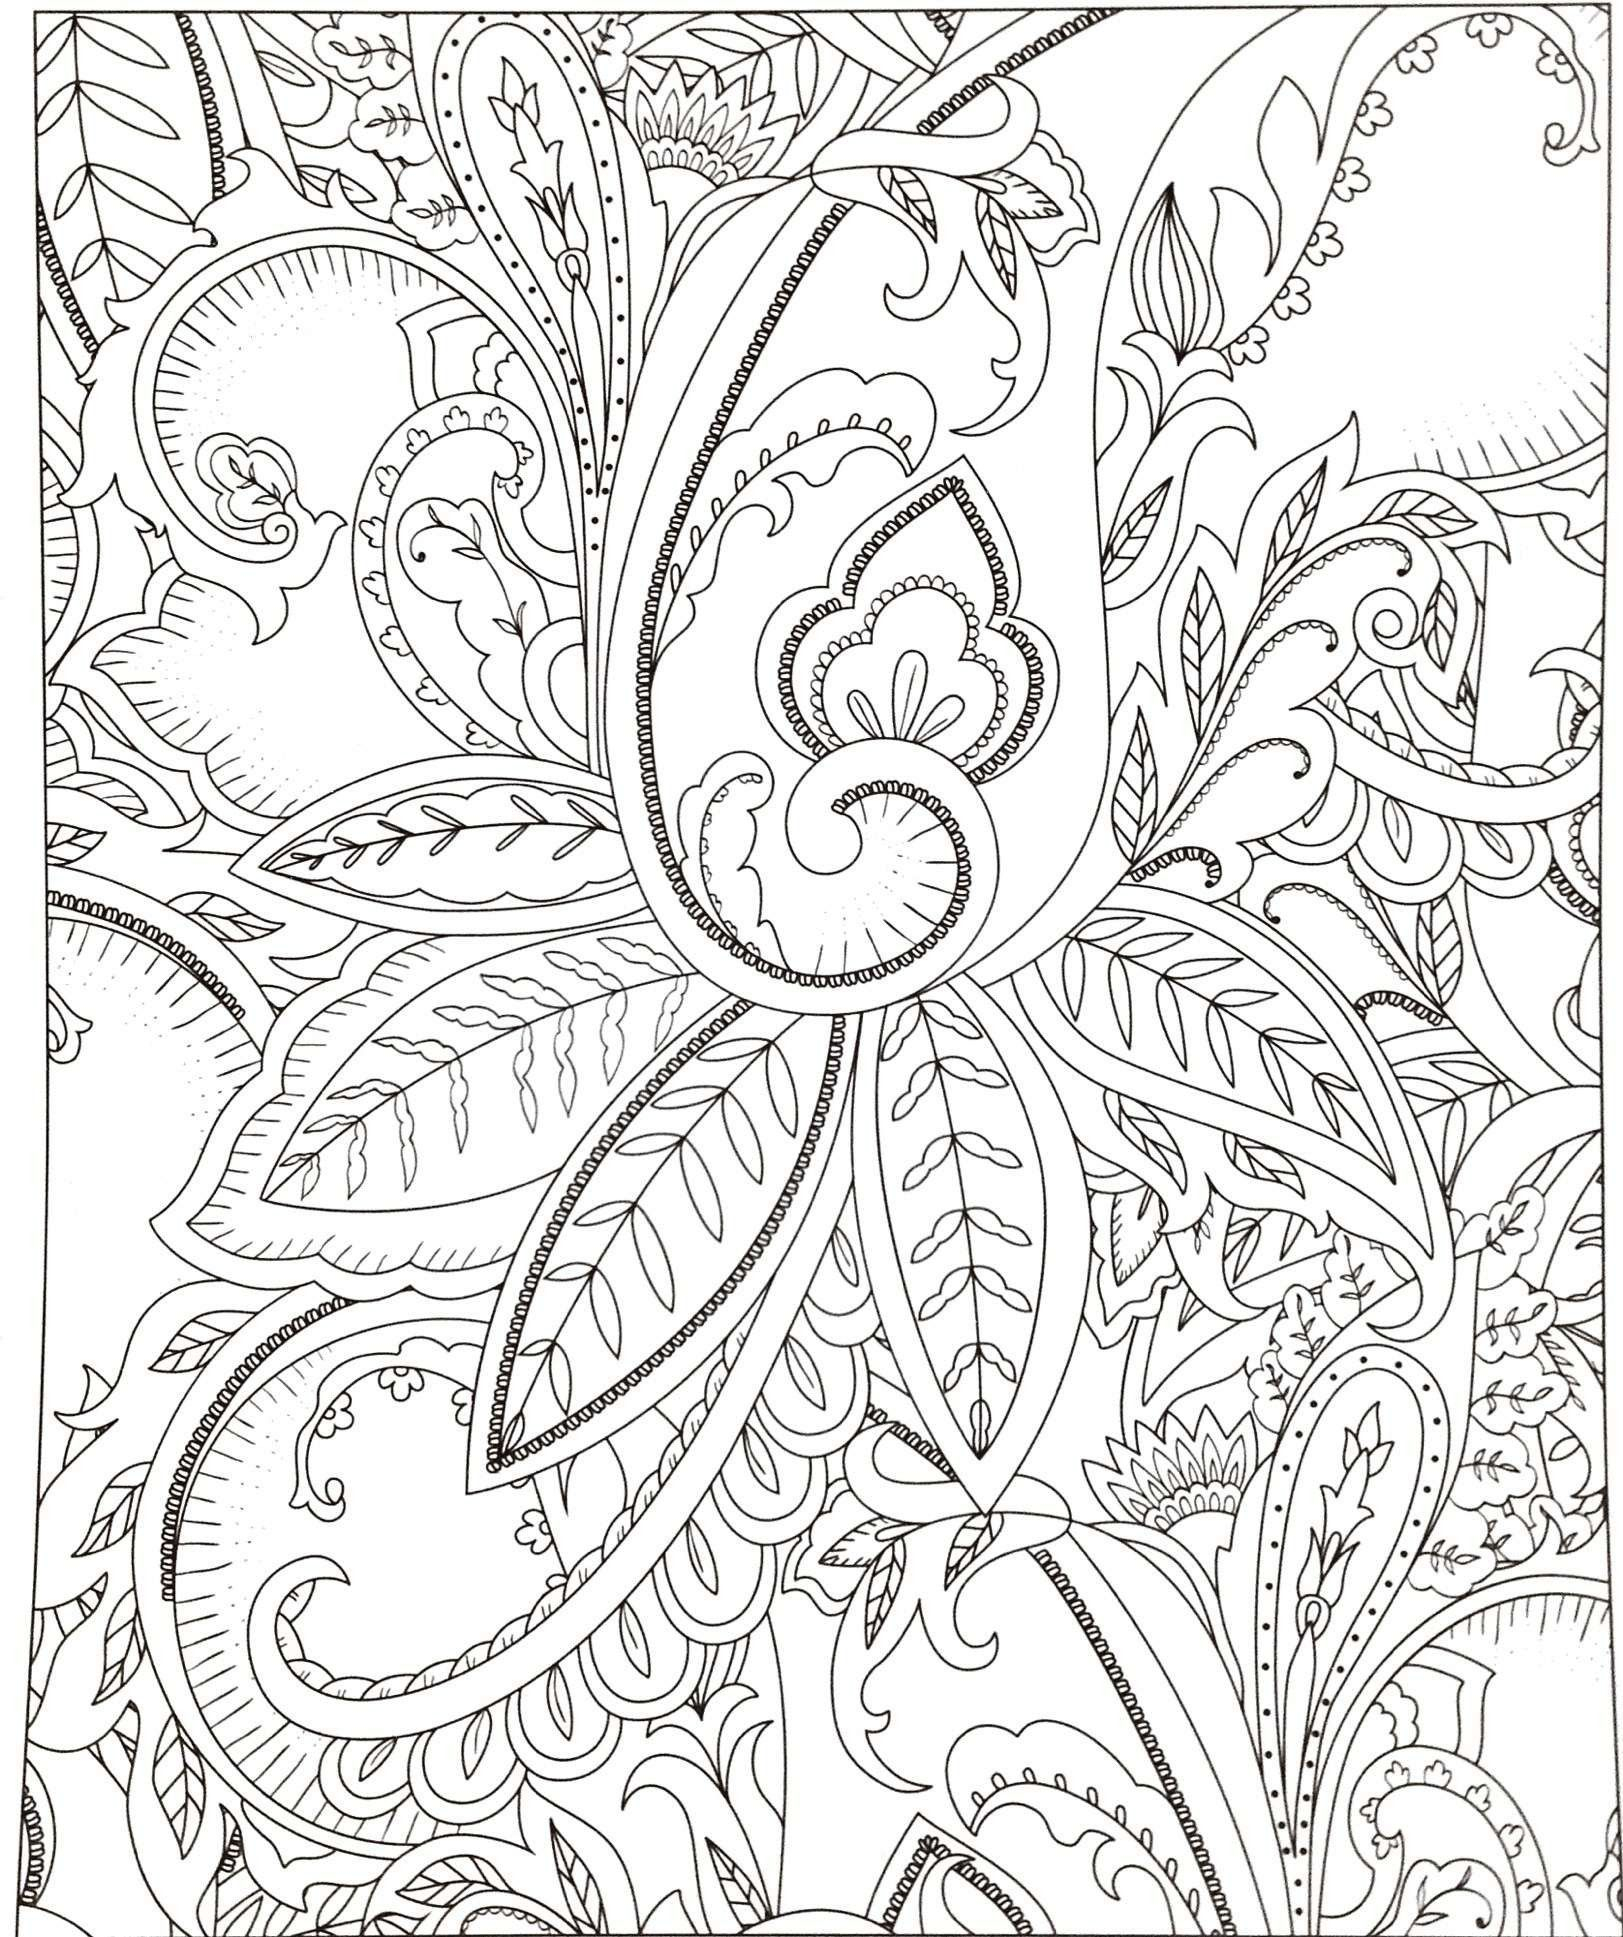 Spanish Christmas Coloring Pages Luxury Free Coloring Pages In Spanish Jvzooreview